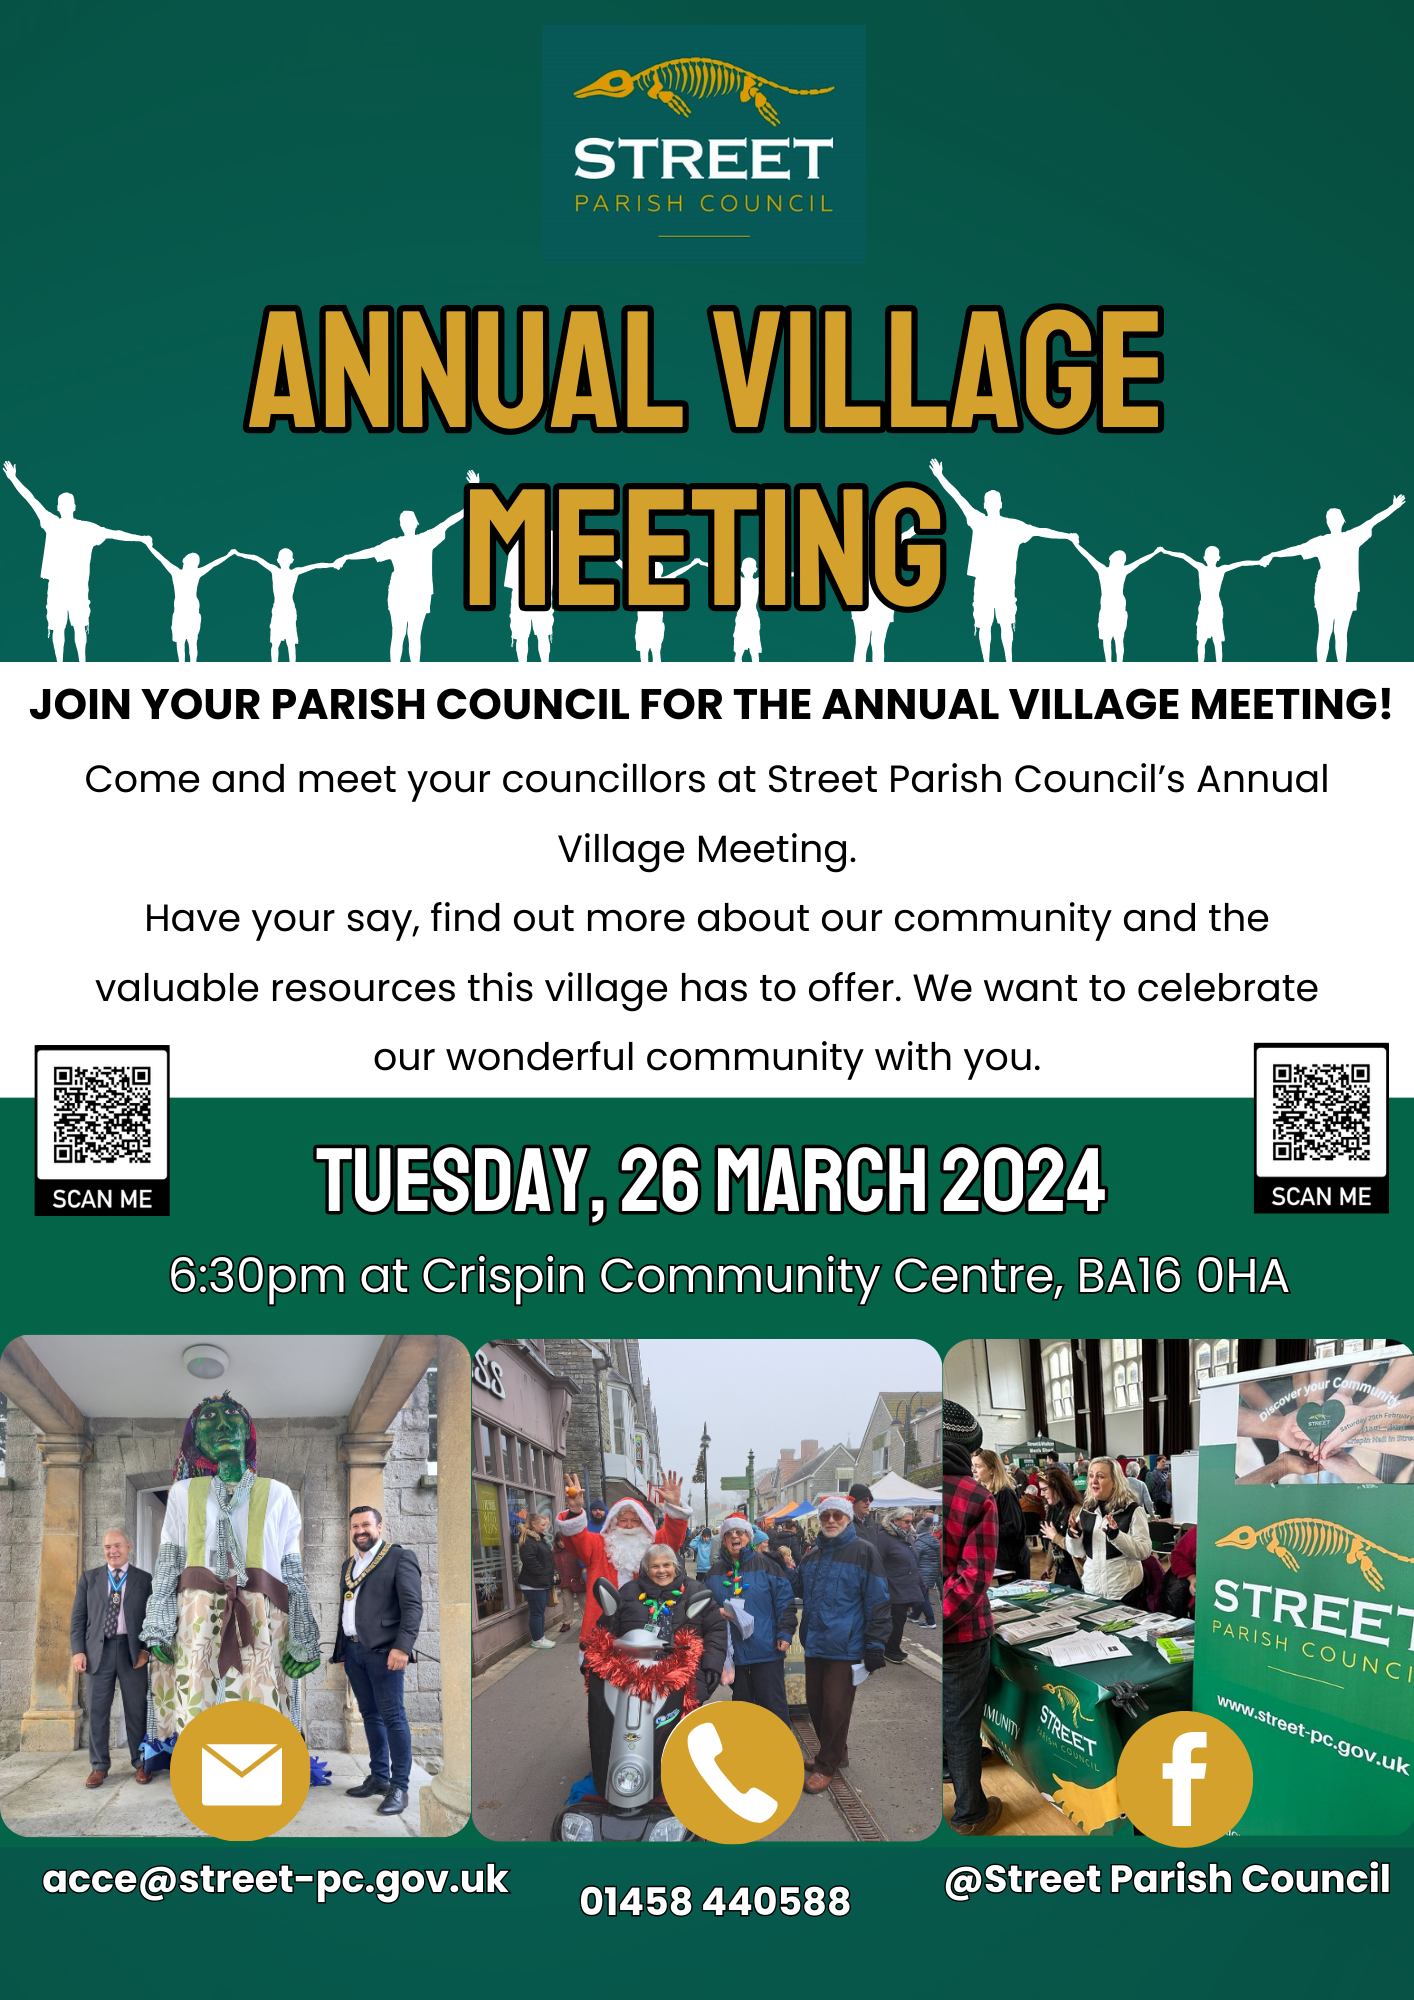 Annual Village Meeting, Tues 26th March 2024, Crispin Community Centre 6:30pm – 7:30pm